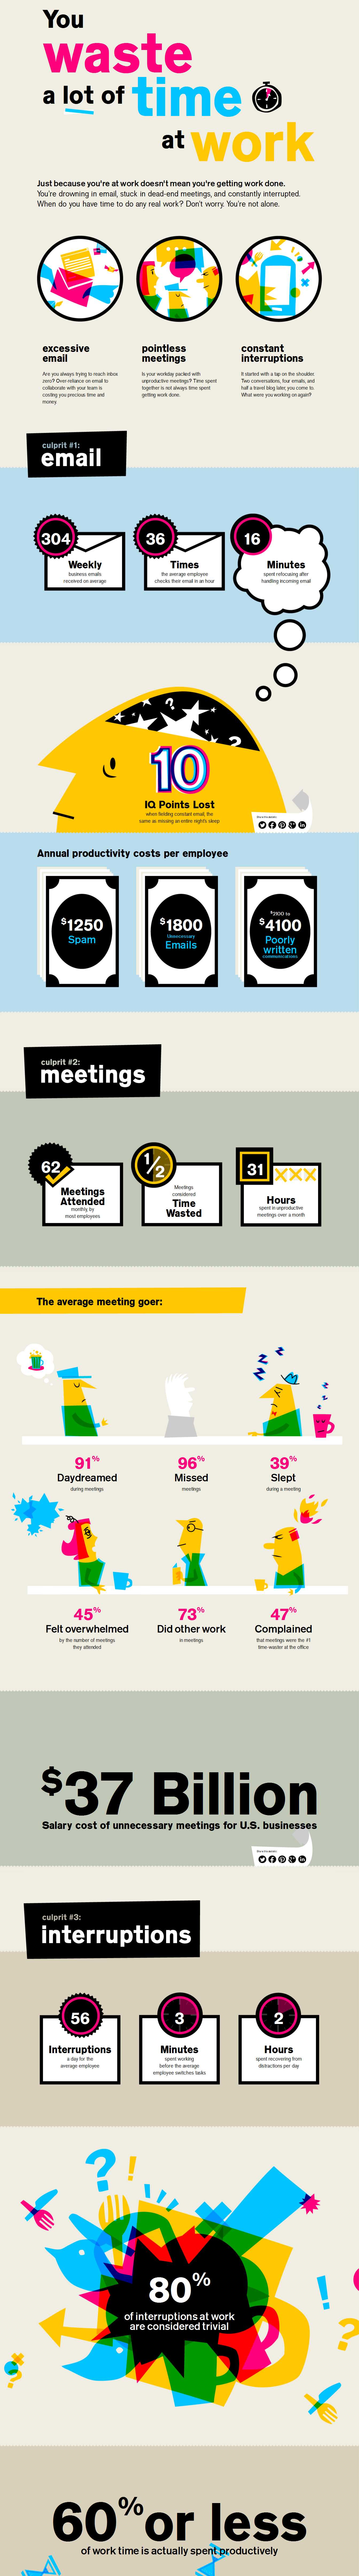 You-Waste-A-Lot-Of-Time-At-Work-infographic.png